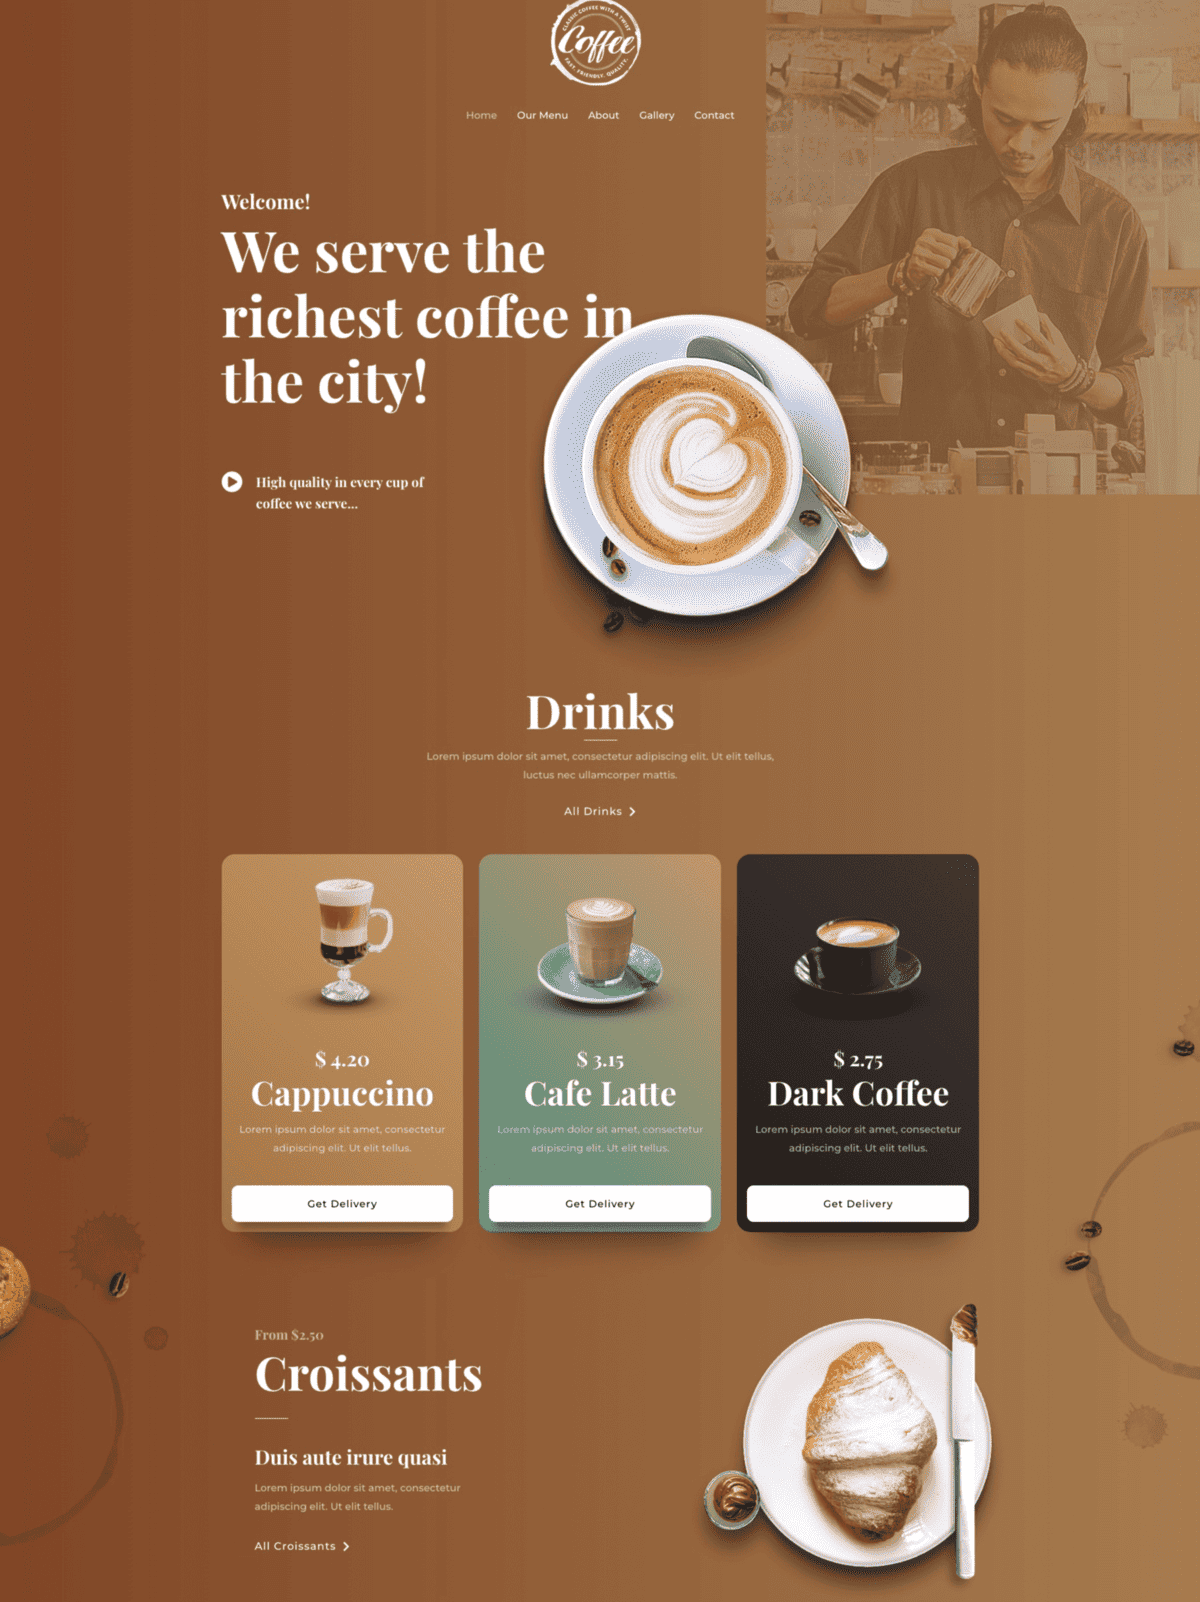 A coffee shop website with a brown and beige color scheme, designed for web development of great websites for small businesses.